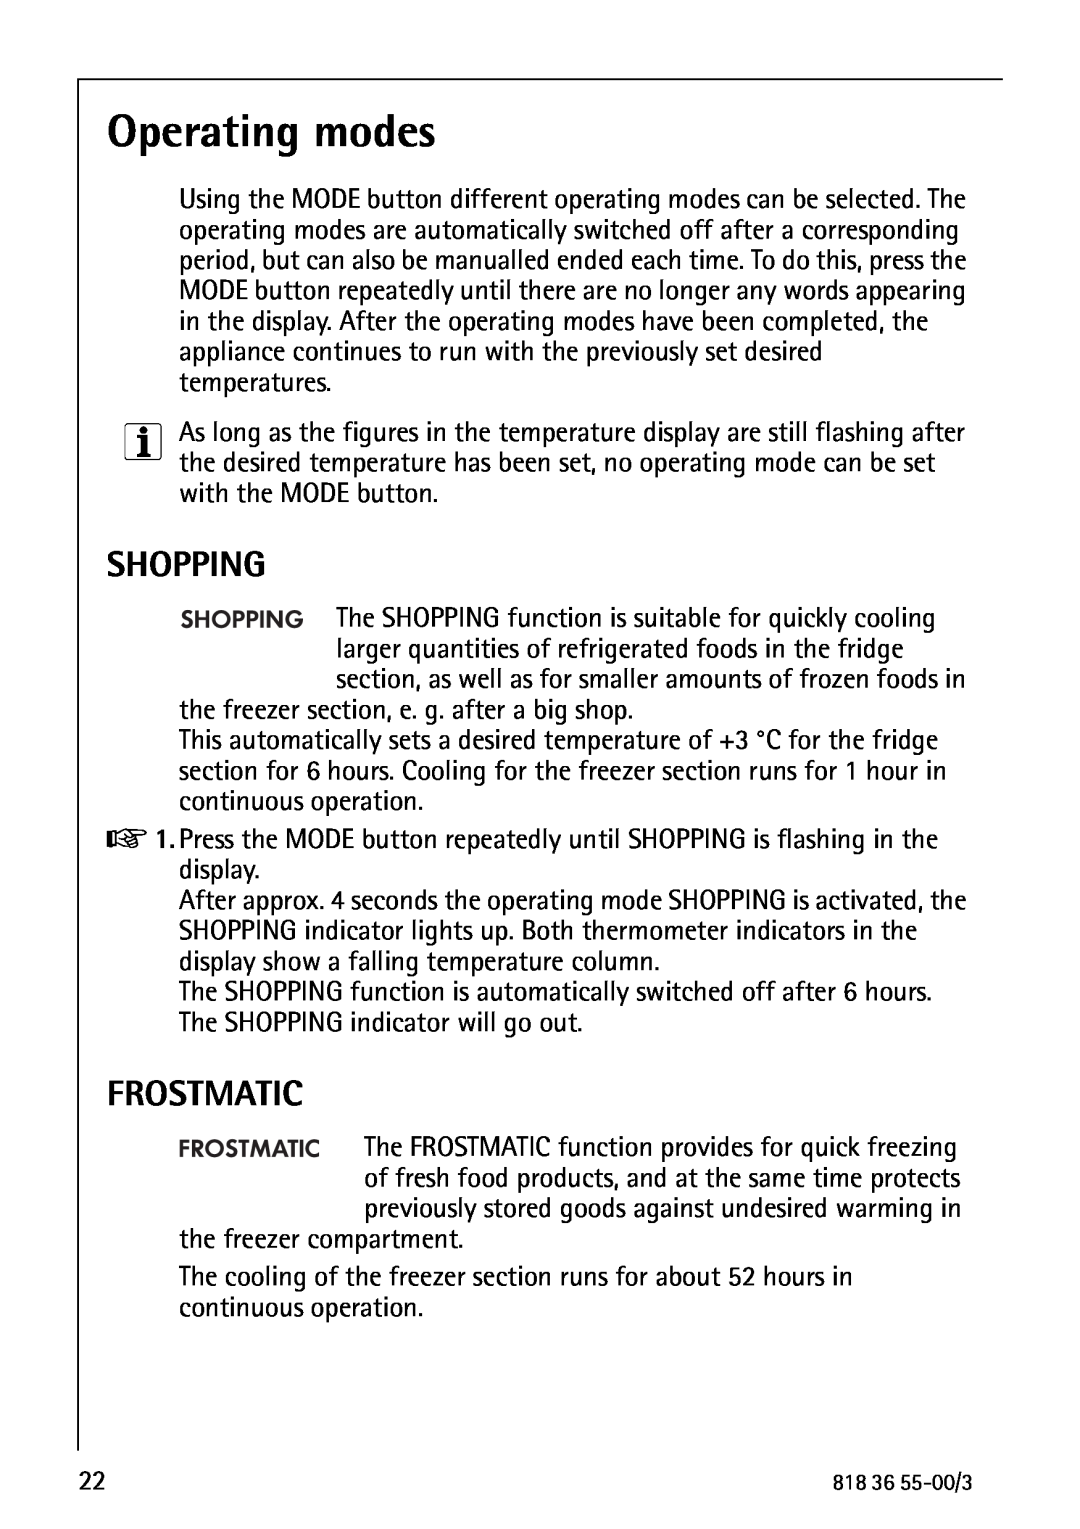 AEG 86378-KG operating instructions Operating modes, Shopping, Frostmatic 